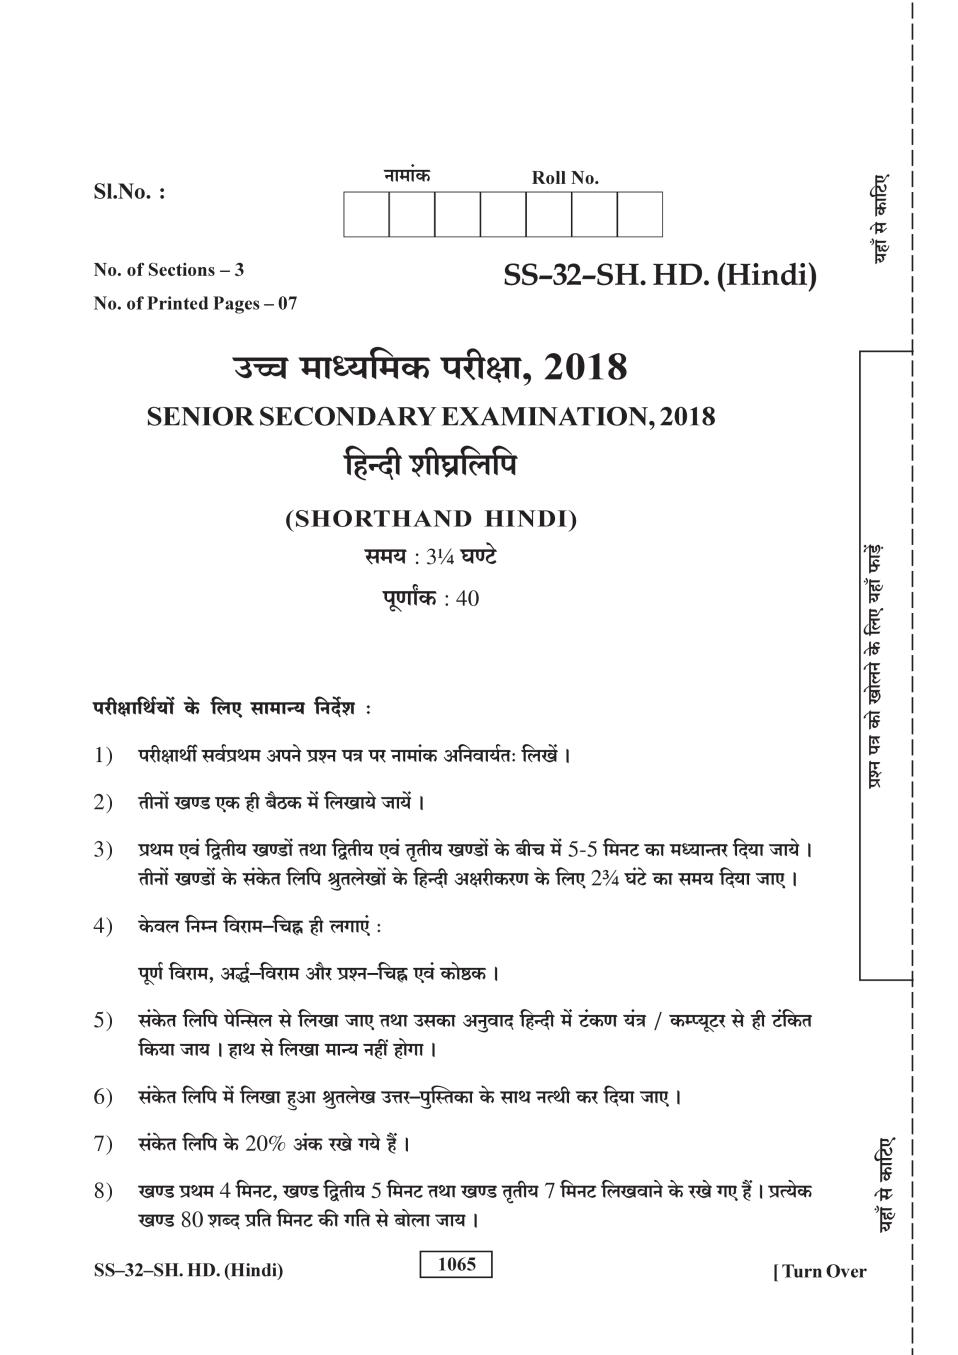 Rajasthan Board 12th Class Shorthand Hindi Question Paper 2018 - Page 1